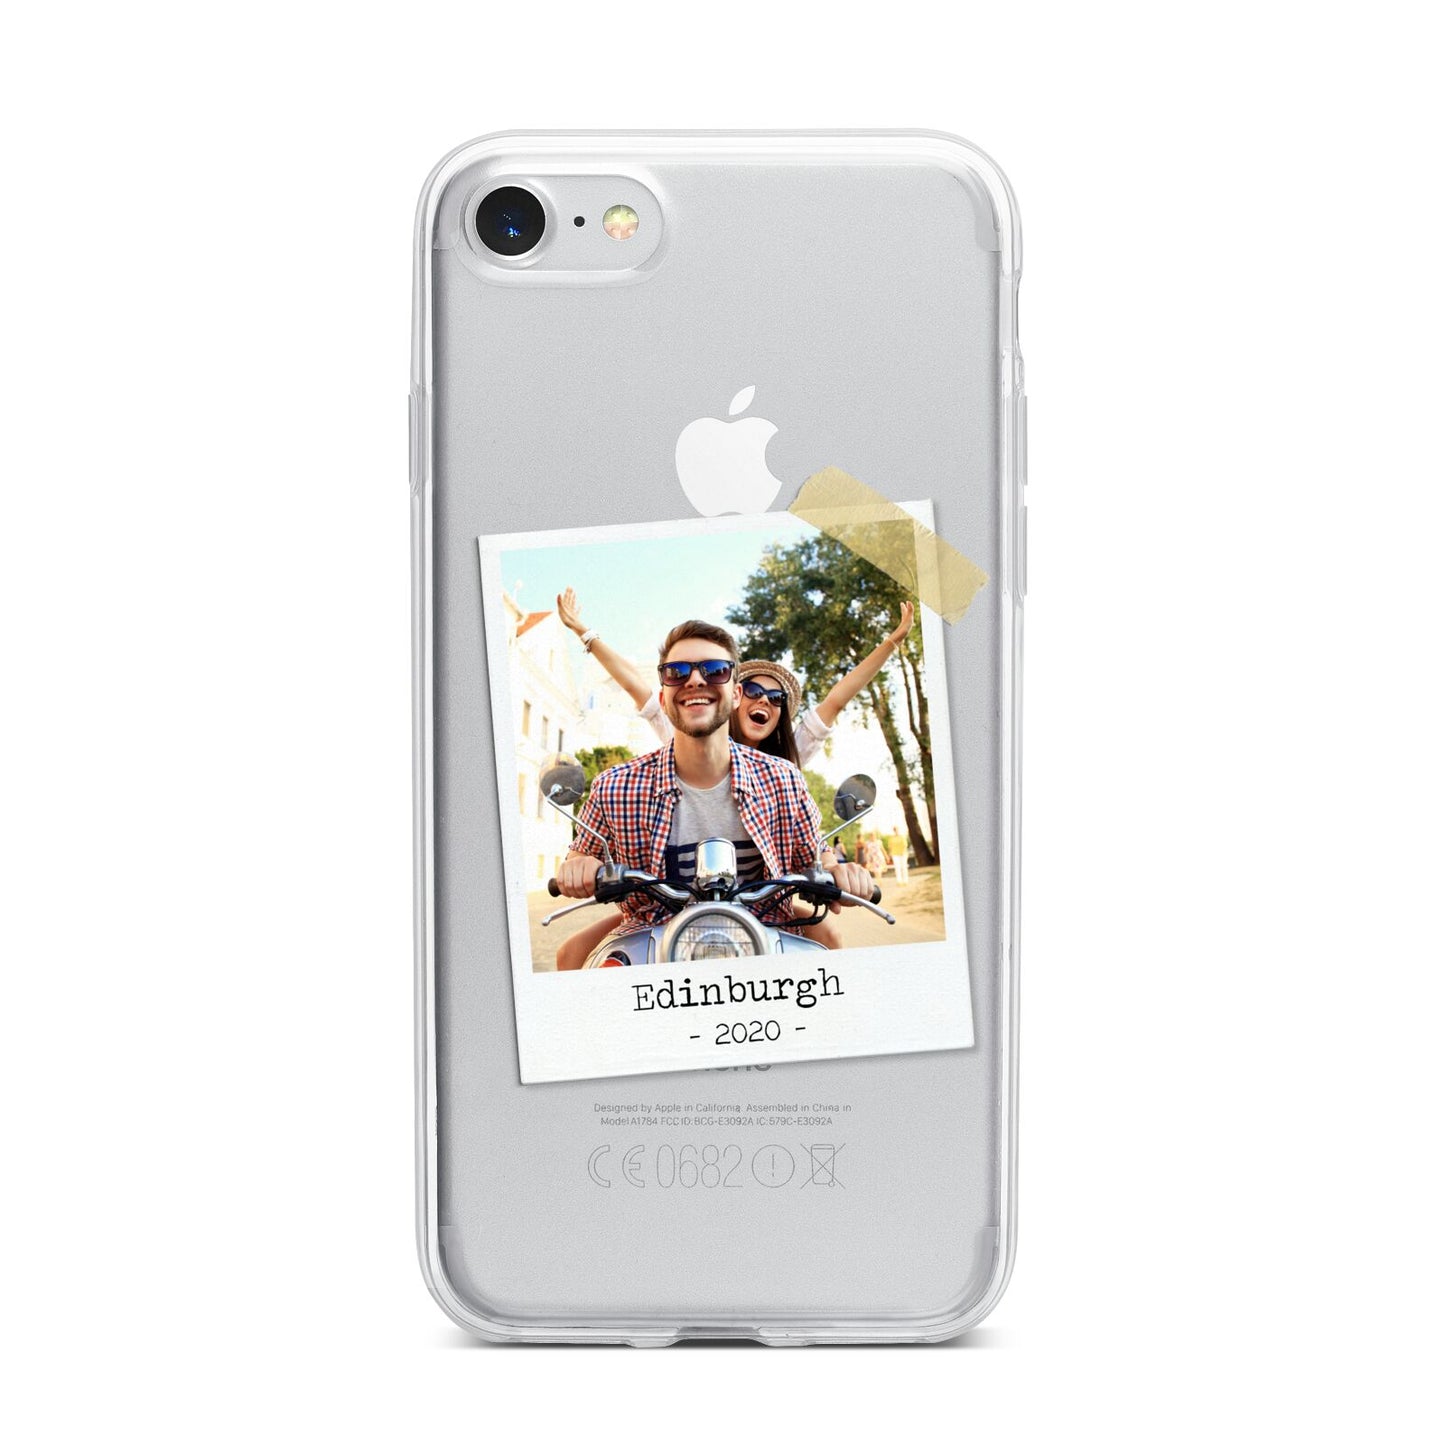 Taped Holiday Snap Photo Upload iPhone 7 Bumper Case on Silver iPhone